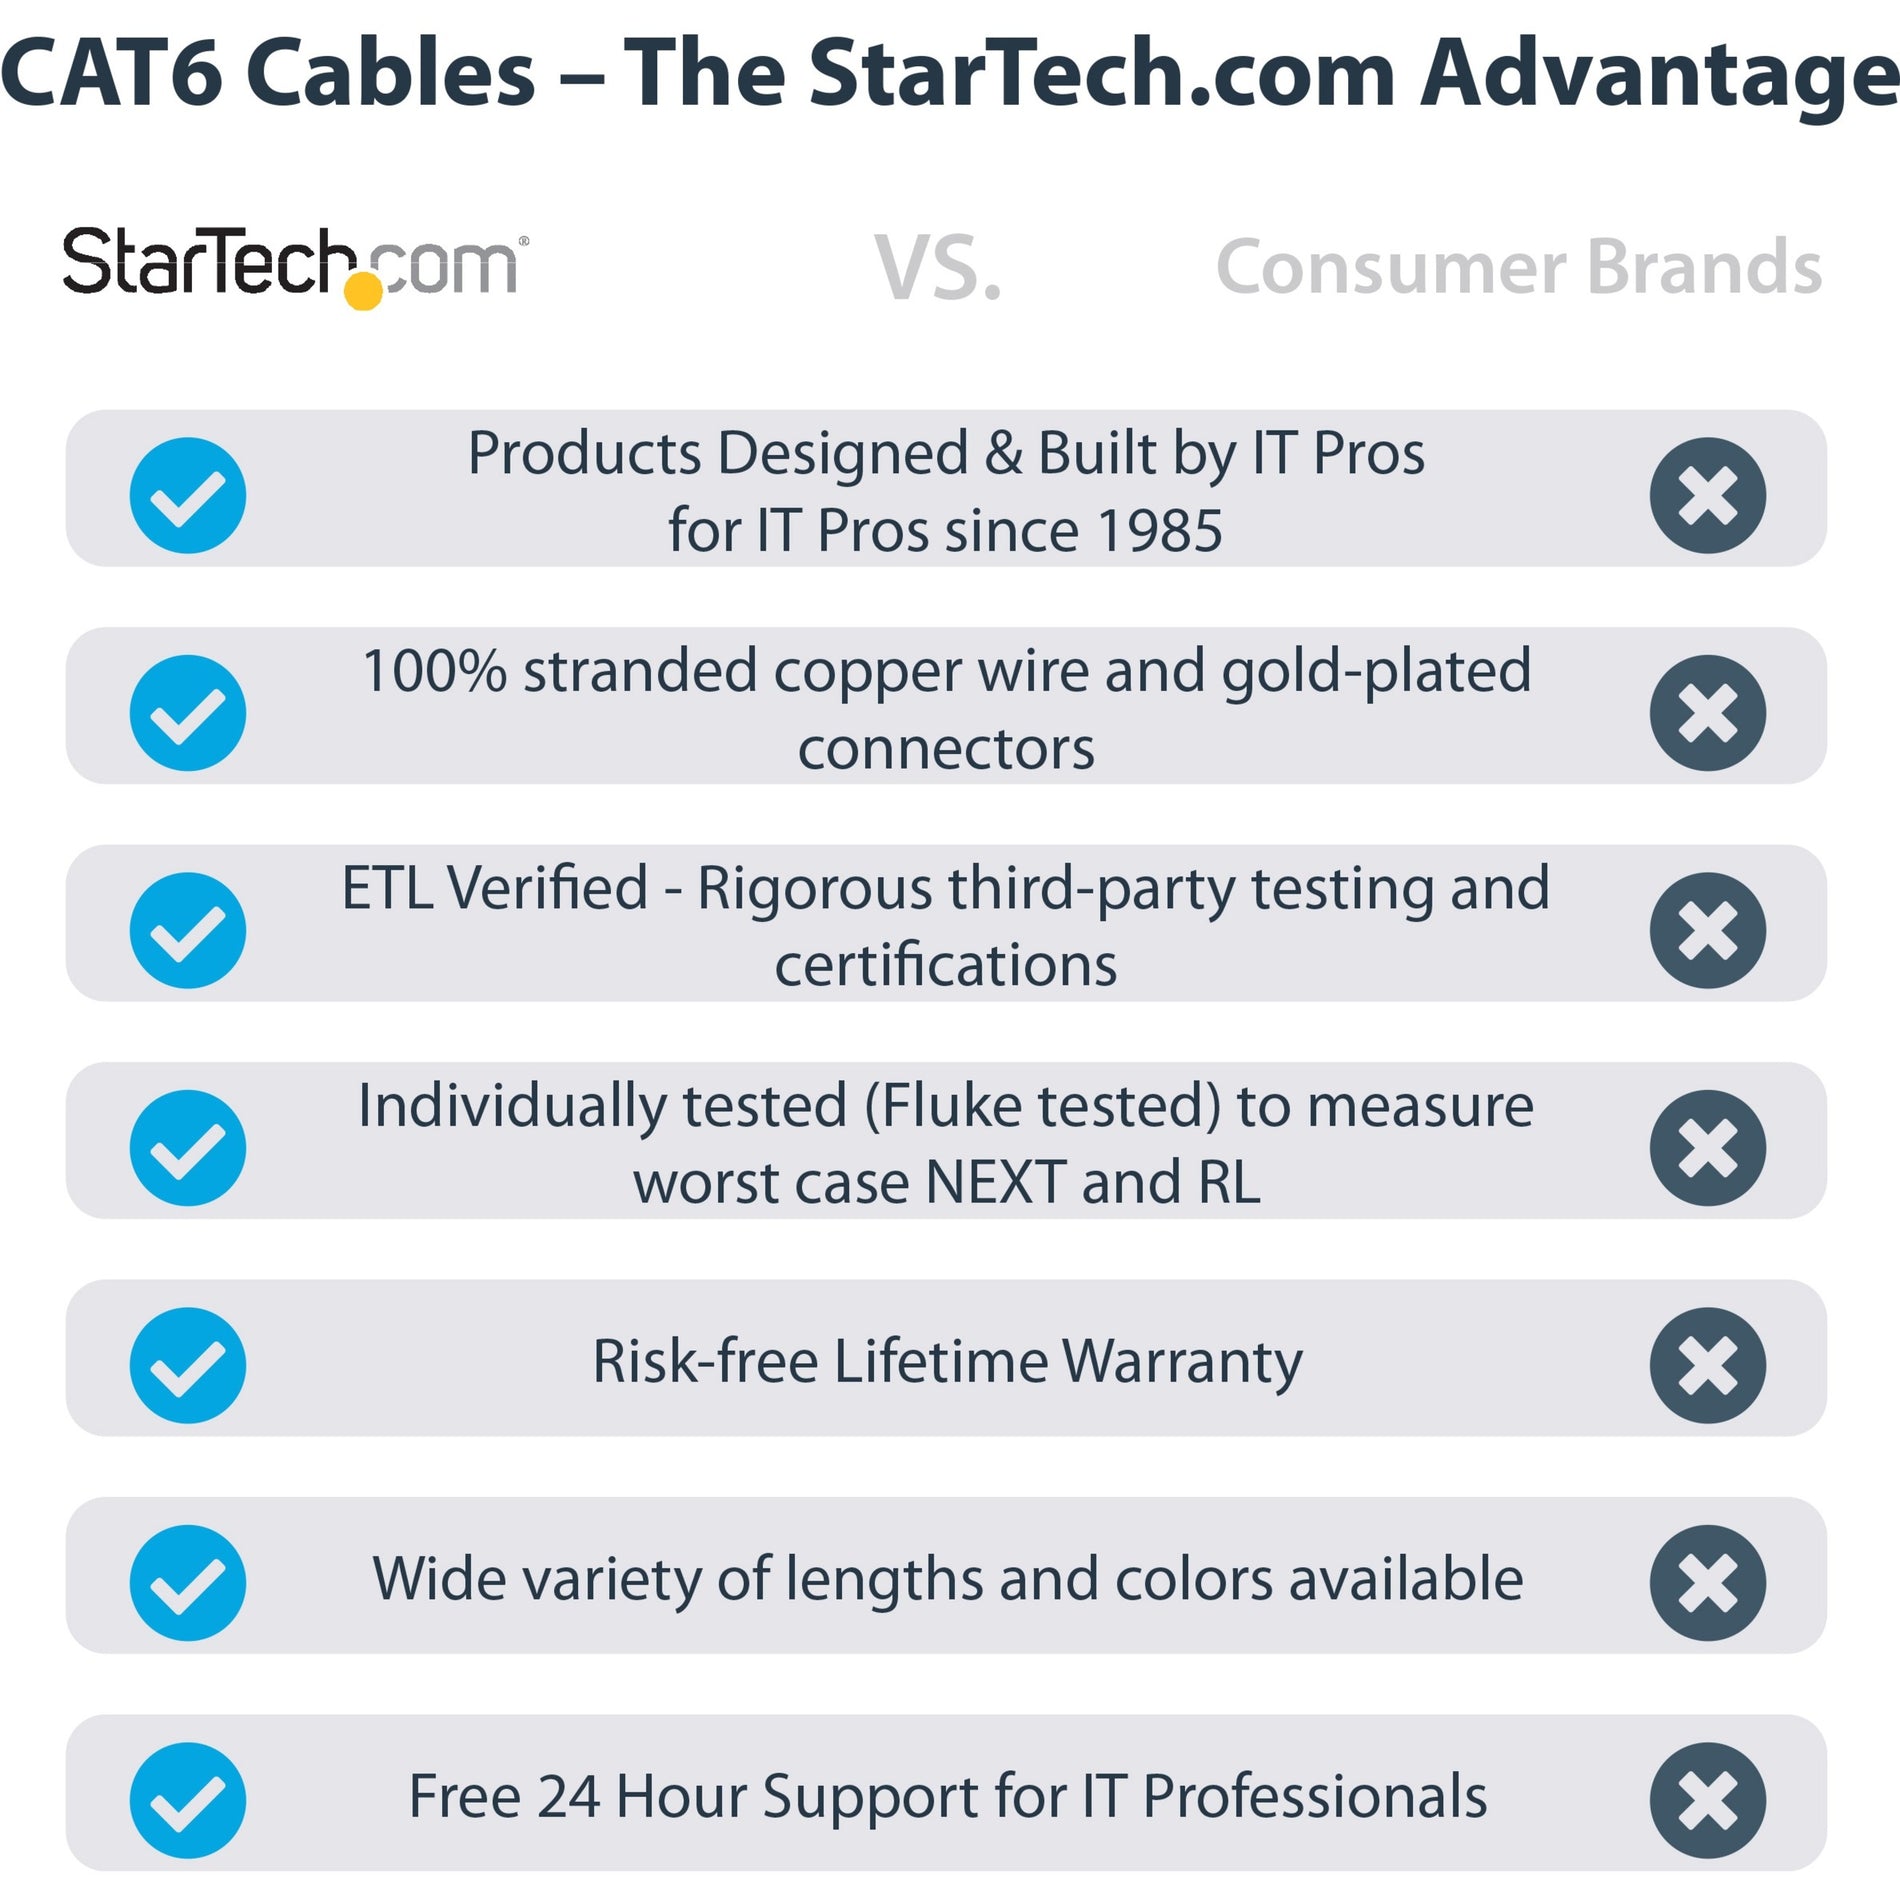 StarTech.com N6PATCH25GR 25 ft Gray Snagless Cat6 UTP Patch Cable, 10 Gbit/s Data Transfer Rate, Lifetime Warranty